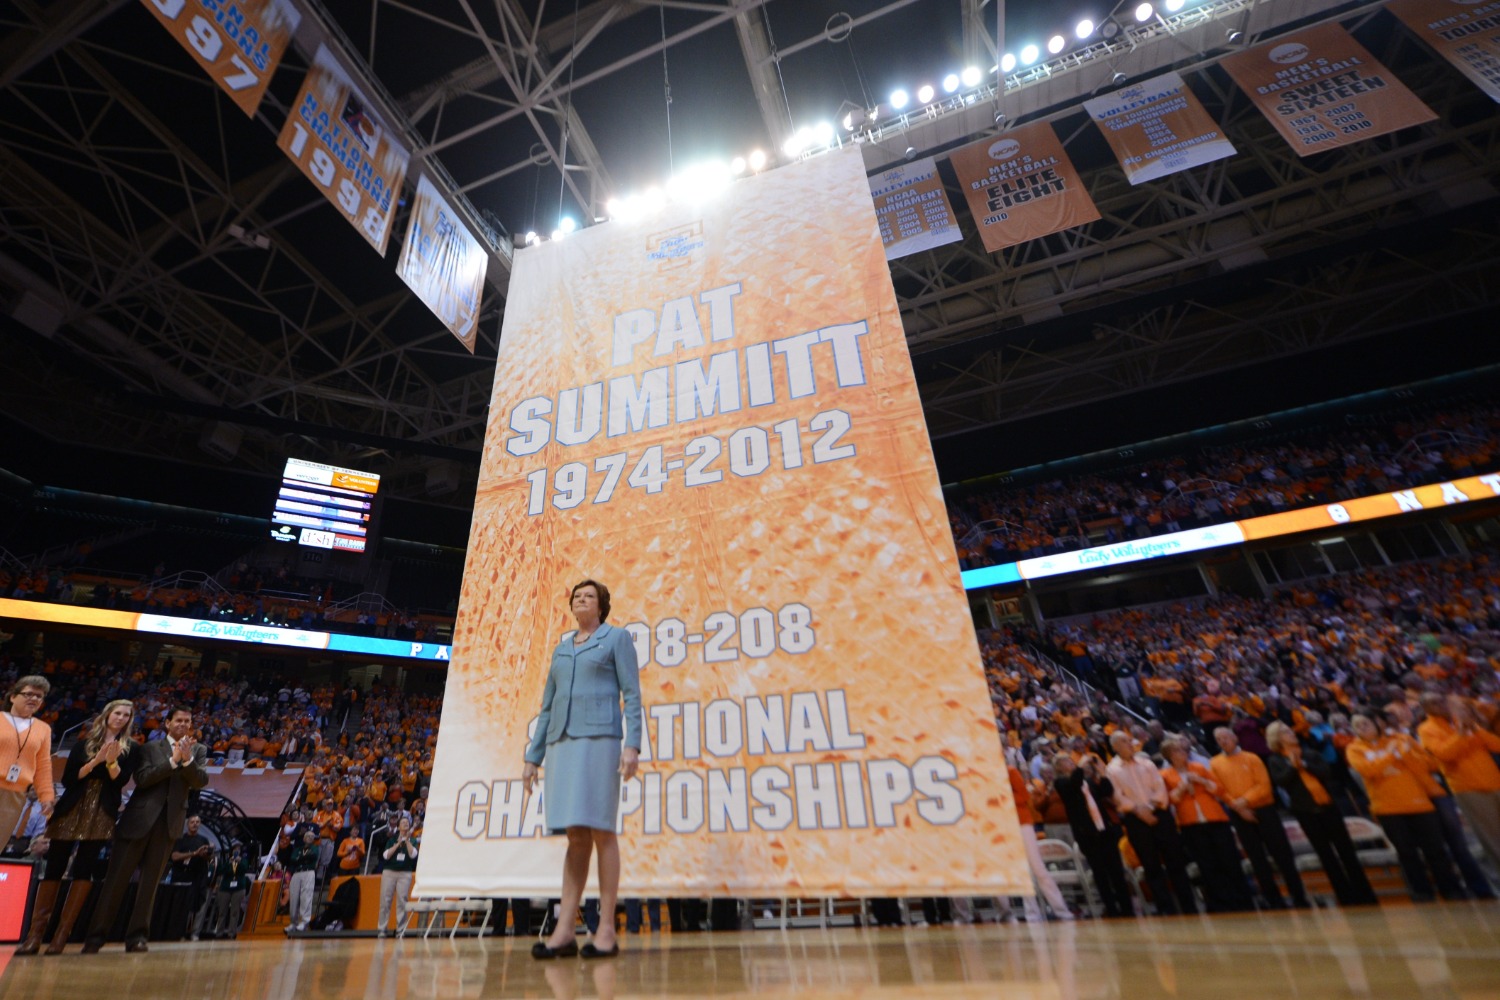 Pat Summitt became the greatest women's basketball coach in history at the University of Tennessee before she tragically died at age 64.